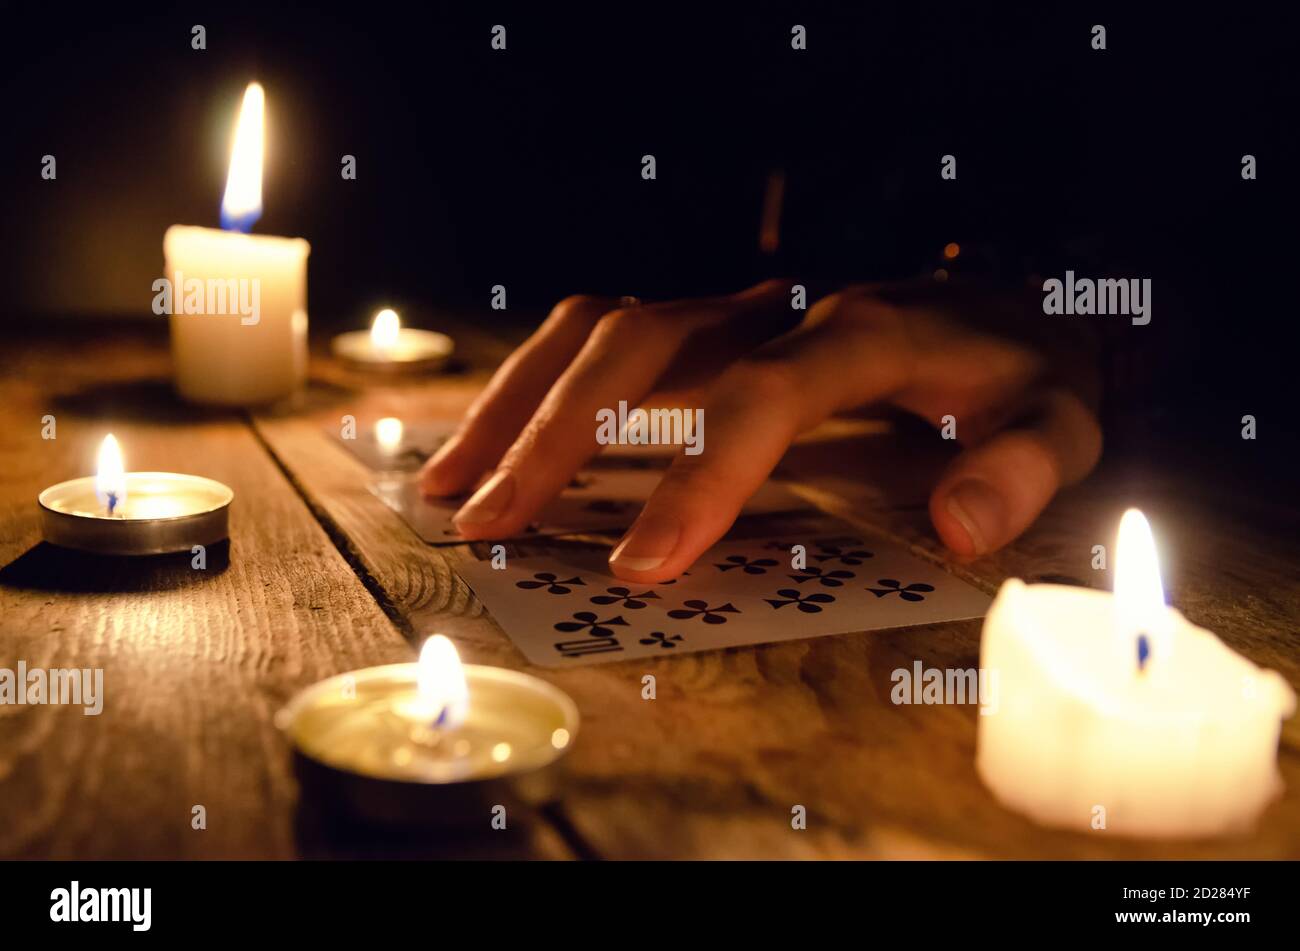 Hands of a fortune teller and cards on the table, around lit candles in the dark on a wooden table. concept of divination, magic Stock Photo